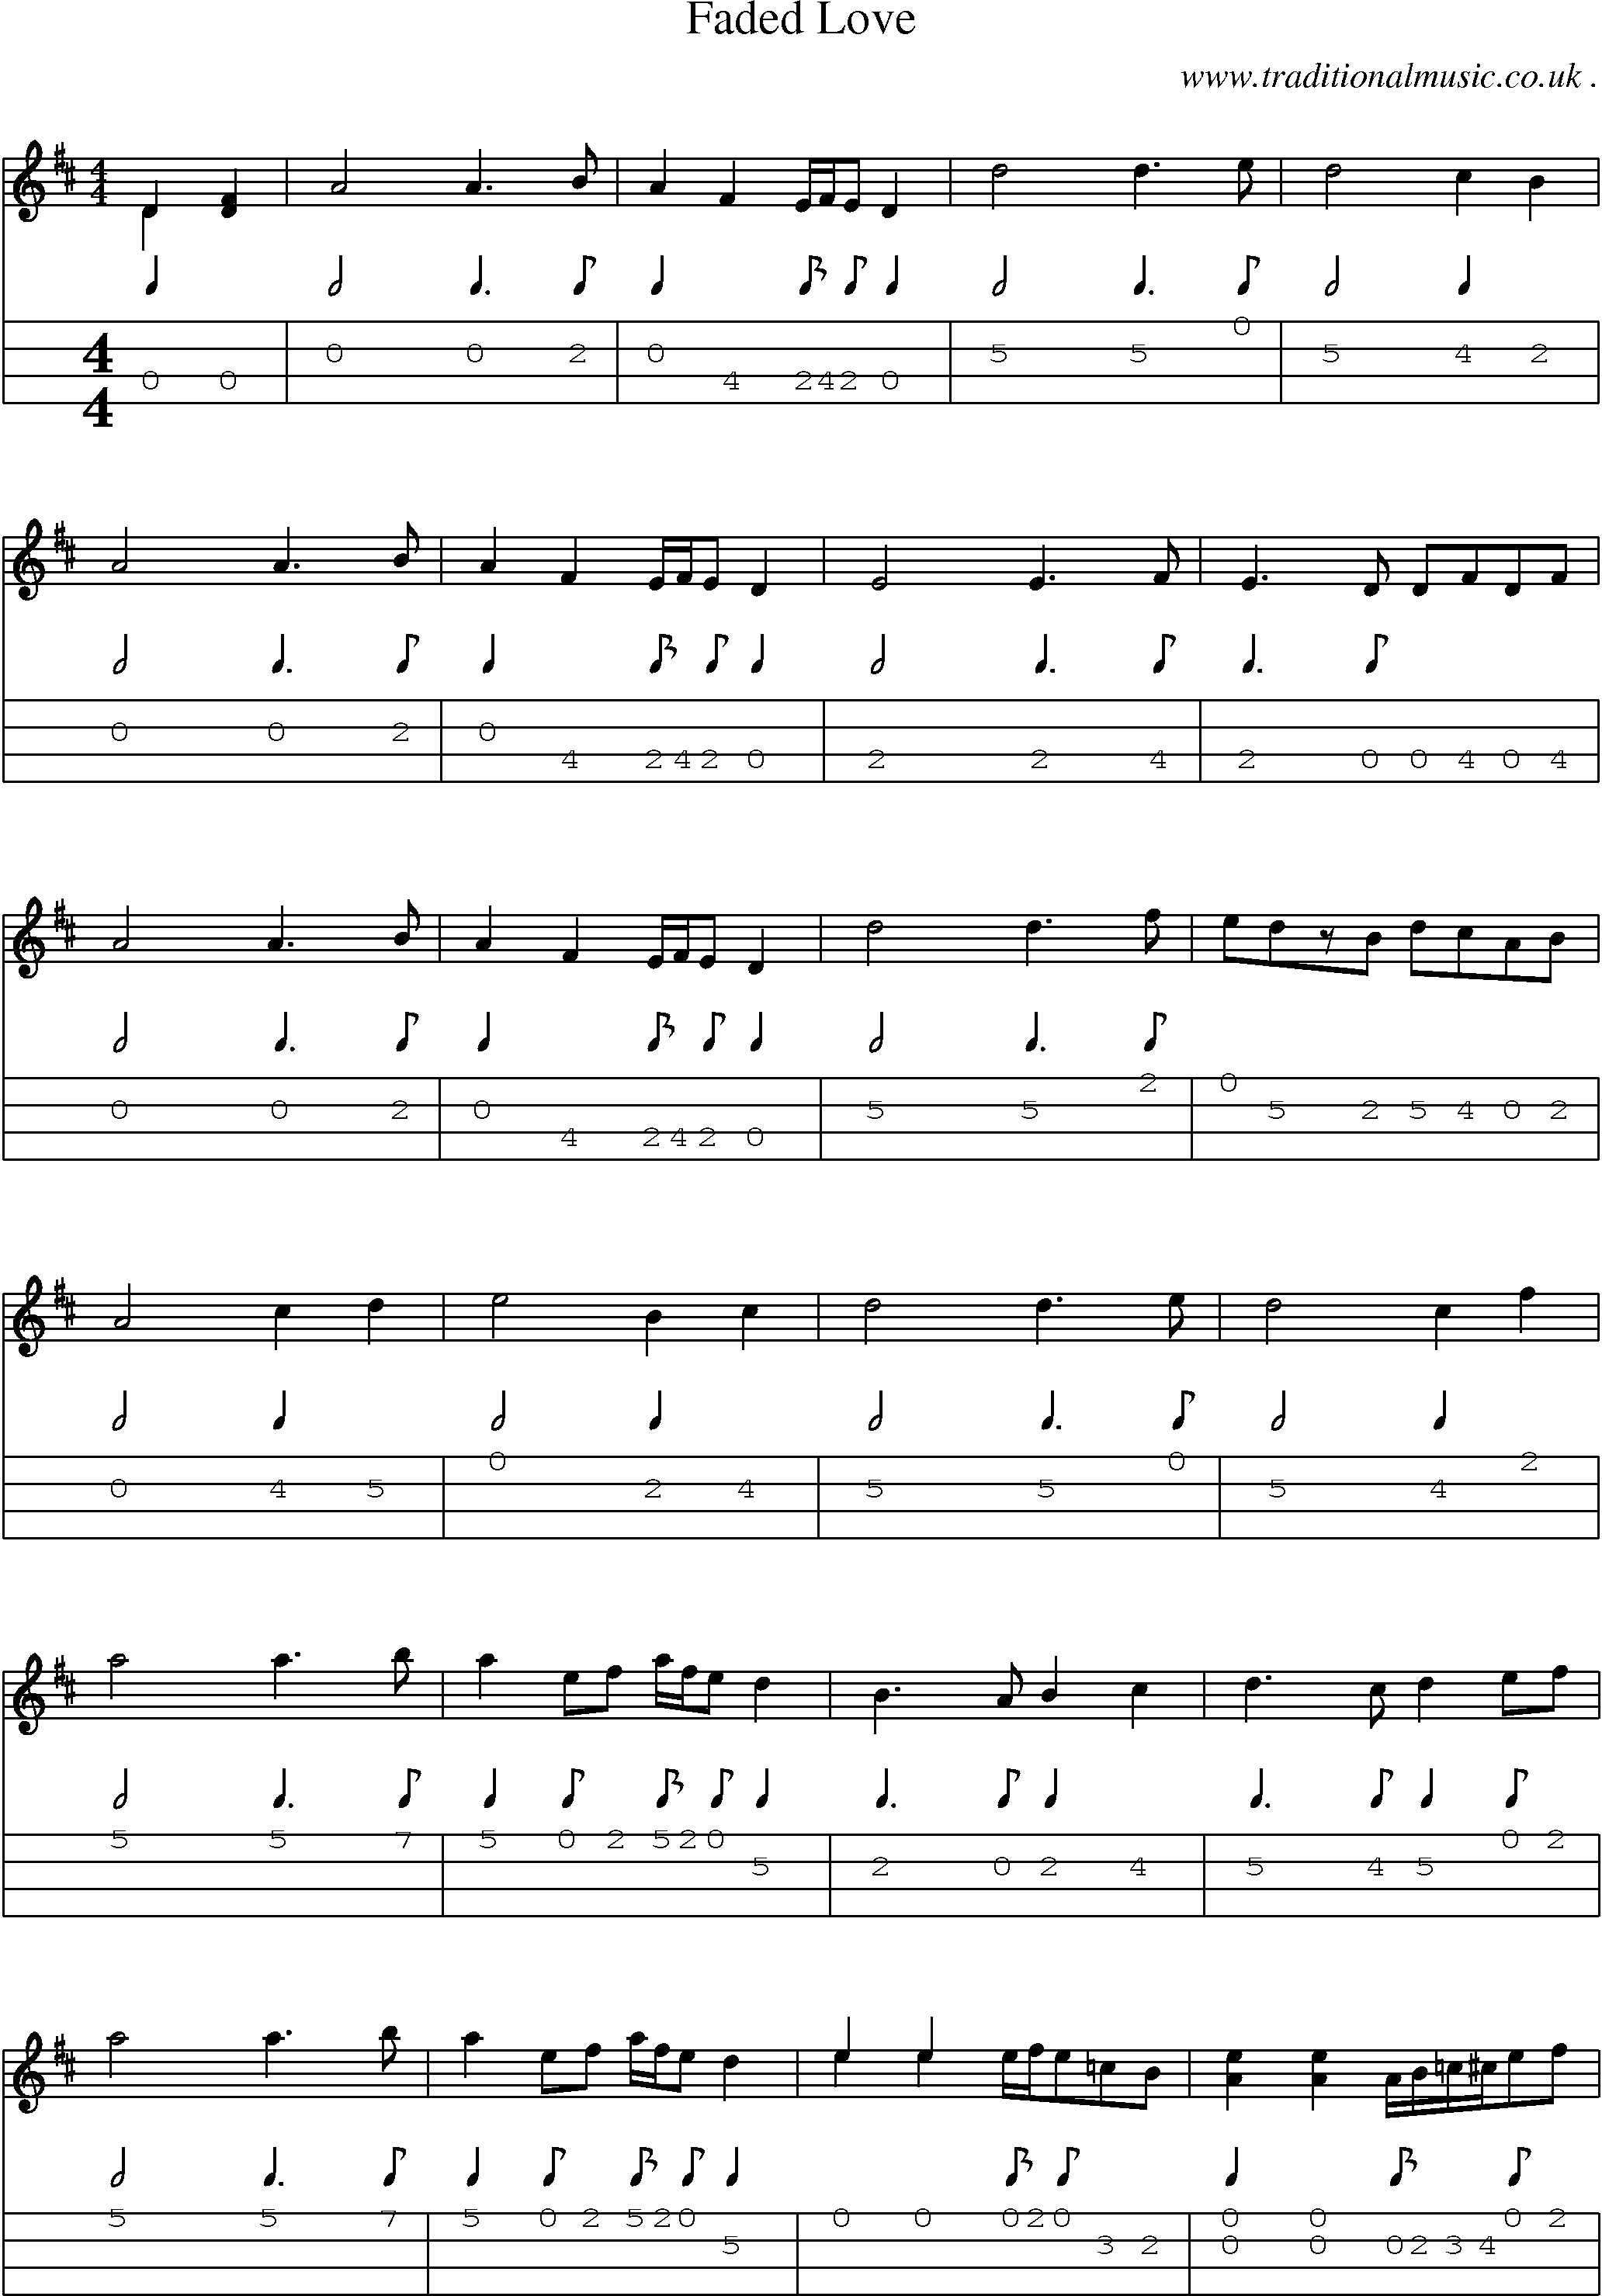 Music Score and Guitar Tabs for Faded Love